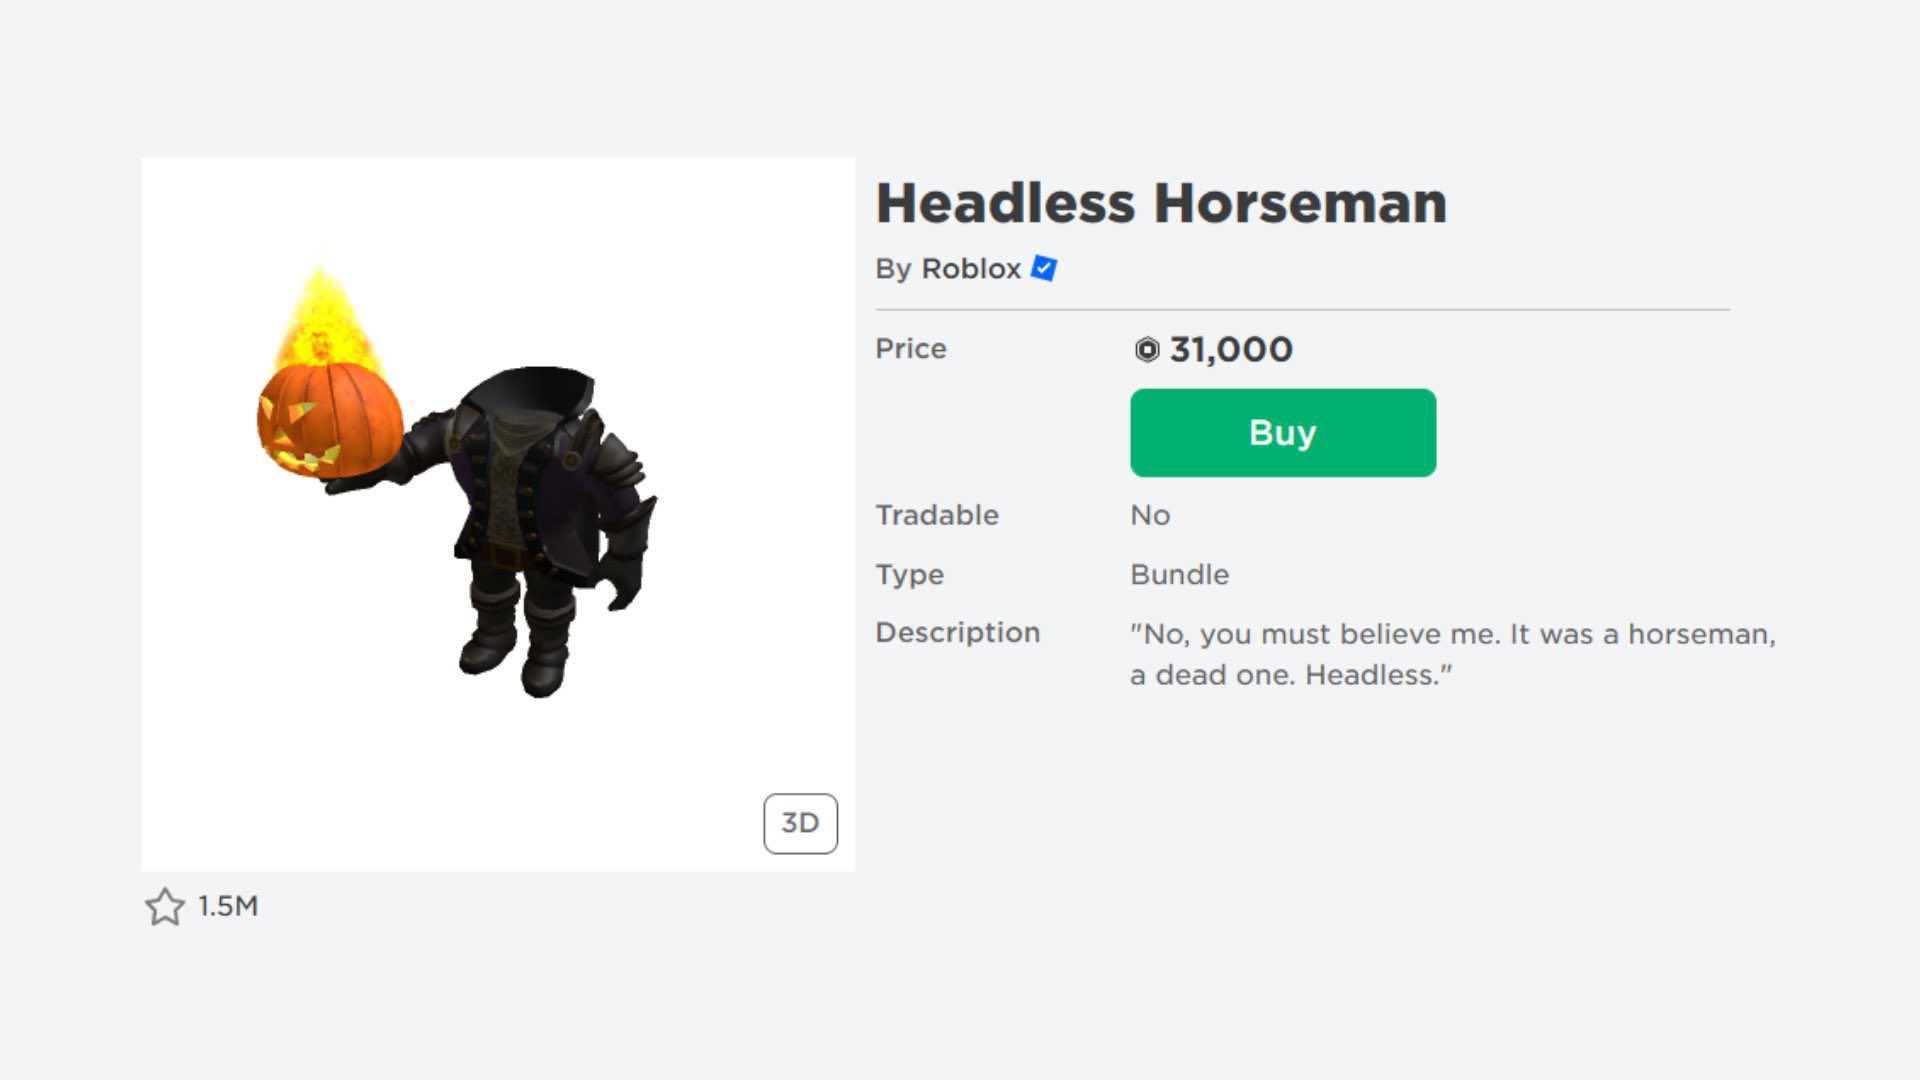 Nickalas on X: Headless Test Bundle: ♥️ 1000 LIKES: Free for 30 MINUTES  🔁100 RETWEETS: Free for 1 HOUR 🥳Hitting 5k Followers: Free for 2 HOURS  USE HASHTAG #HEADLESSBUNDLETEST #RobloxUGC #Roblox #RobloxDev #